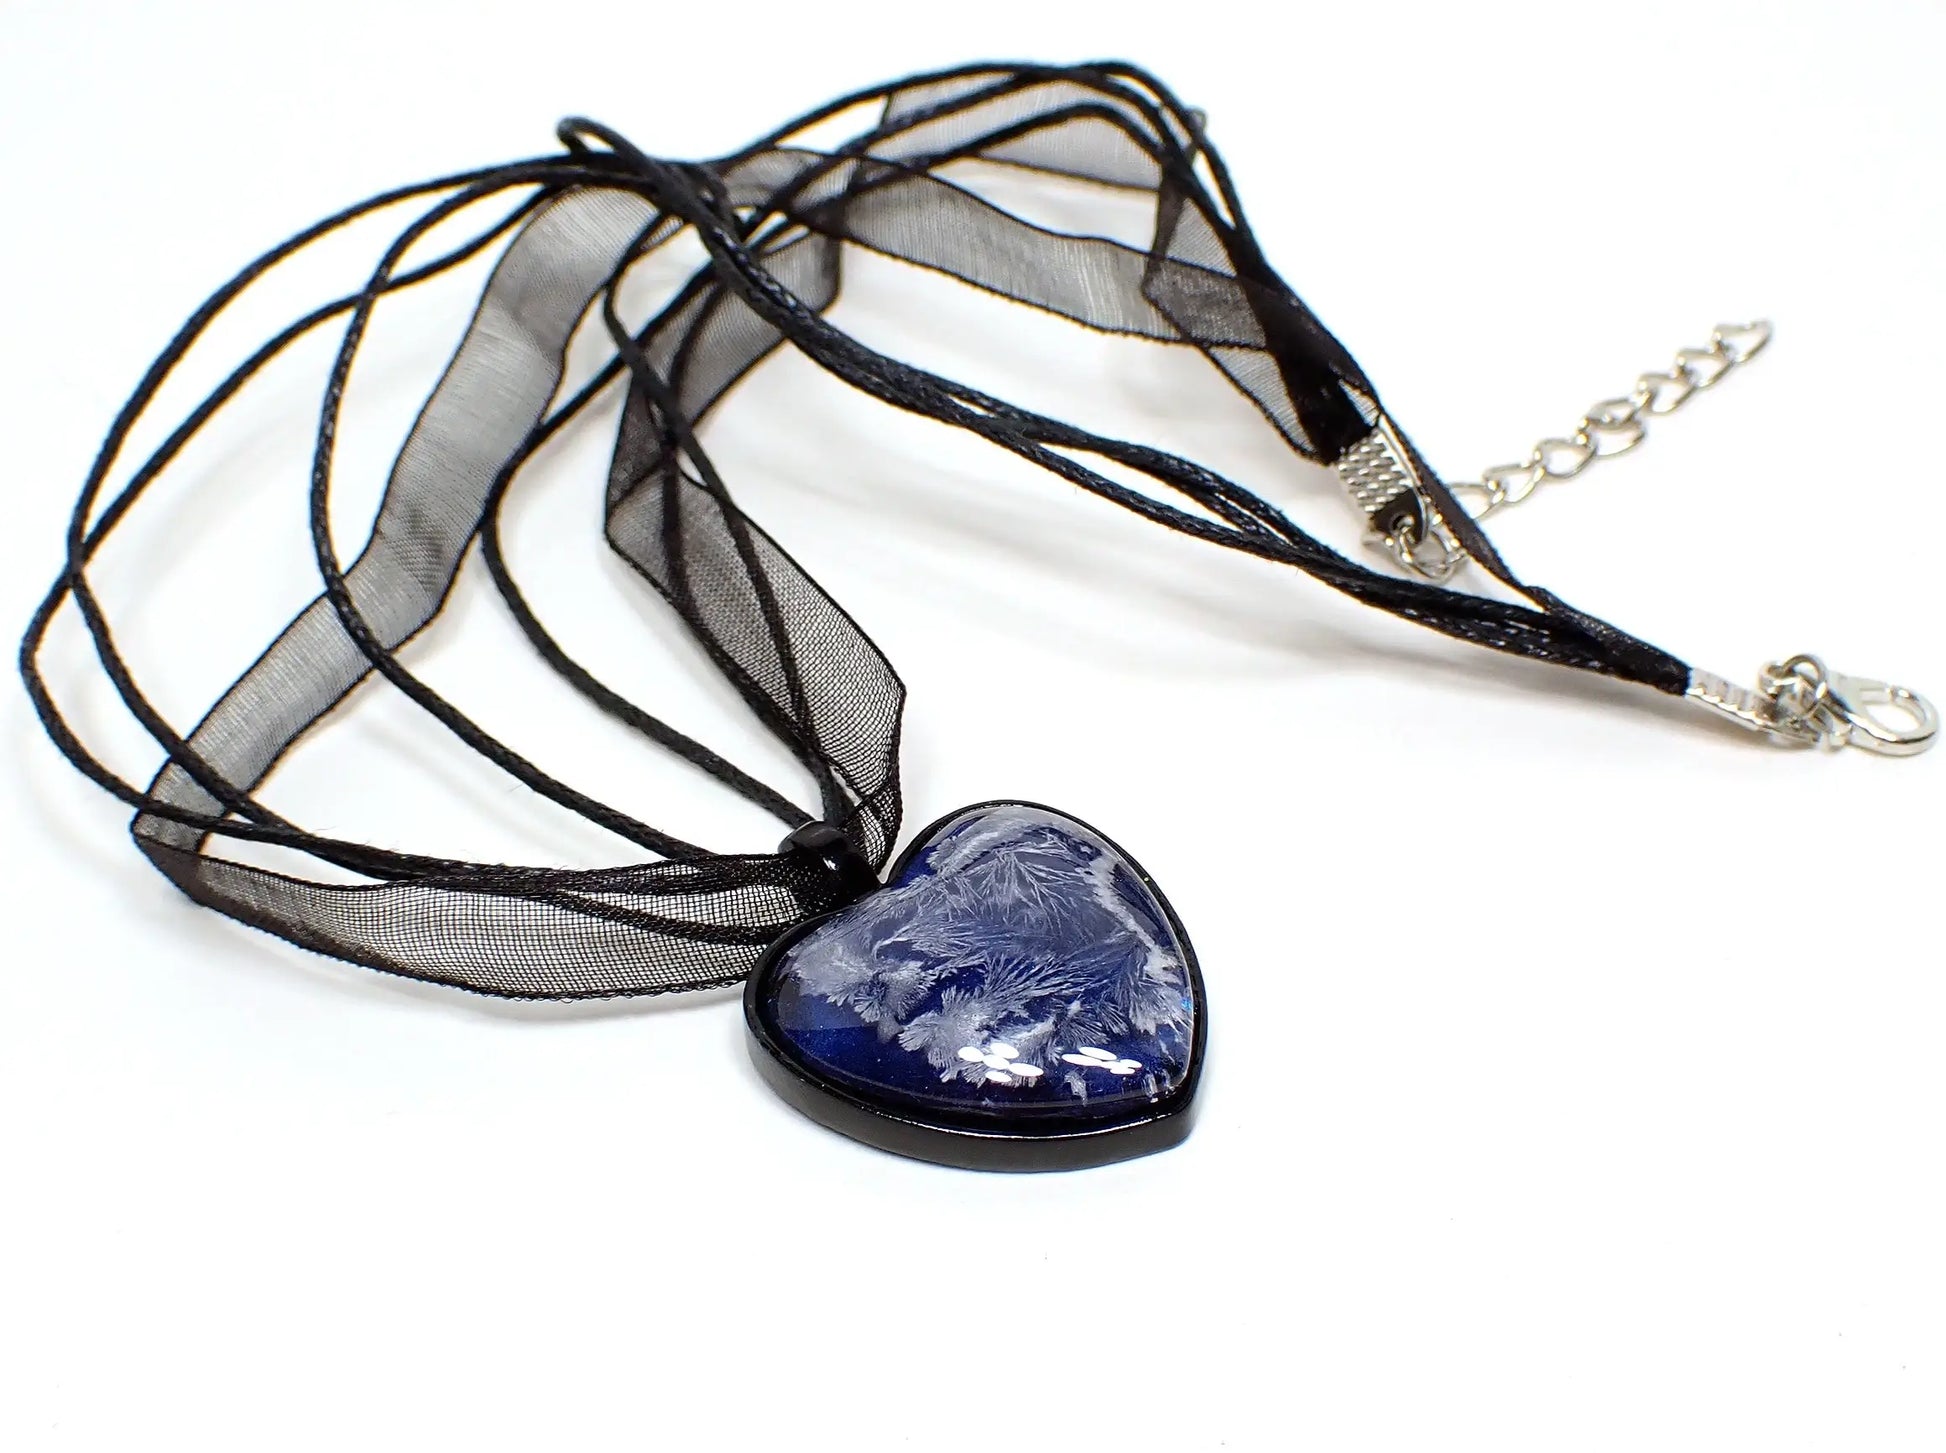 Top view of the handmade cold hearted black heart pendant necklace. The necklace is black with three strands of faux leather cord and a strand of organza ribbon. There is a lobster claw clasp and extender chain at the end. The heart pendant is black coated with iridescent blue resin and a white abstract frost like design through the resin.